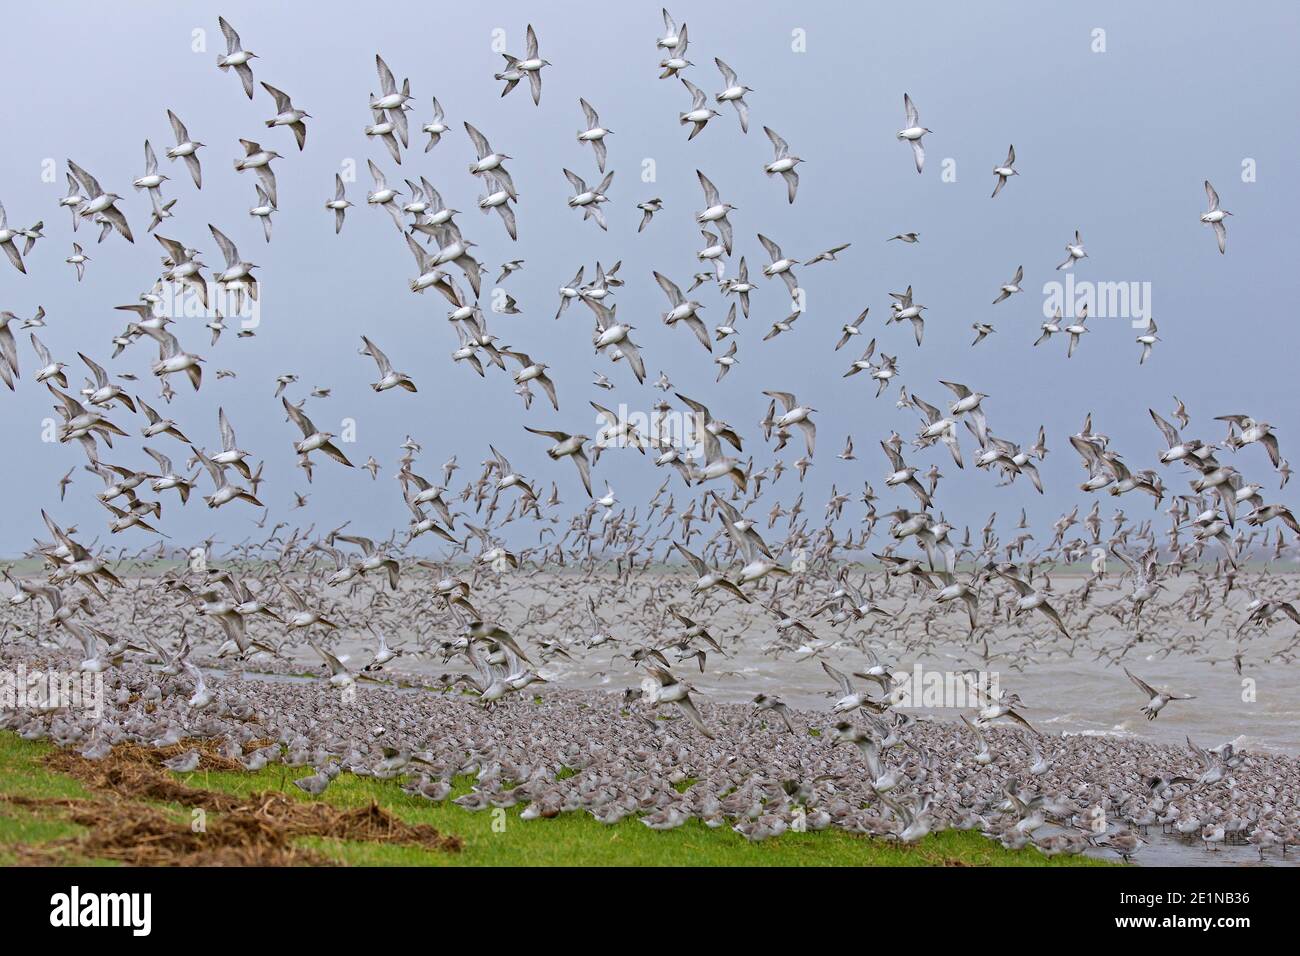 Red knots (Calidris canutus / Tringa canutus ) huge red knot flock in flight in non-breeding plumage taking off from beach in winter along the coast Stock Photo